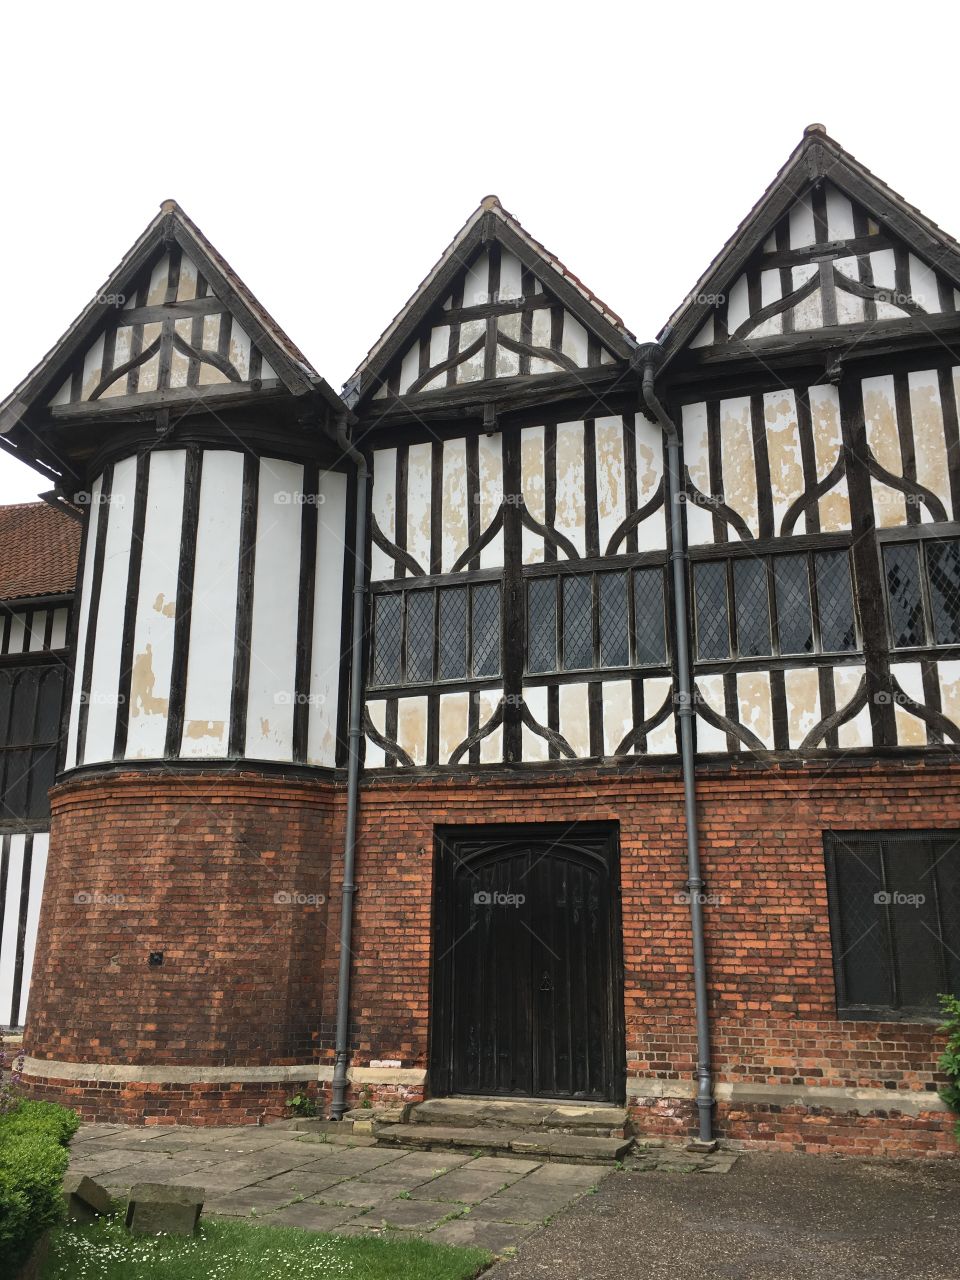 Exterior view of the timber framing and brickwork of the medieval Manor House at Gainsborough Old Hall